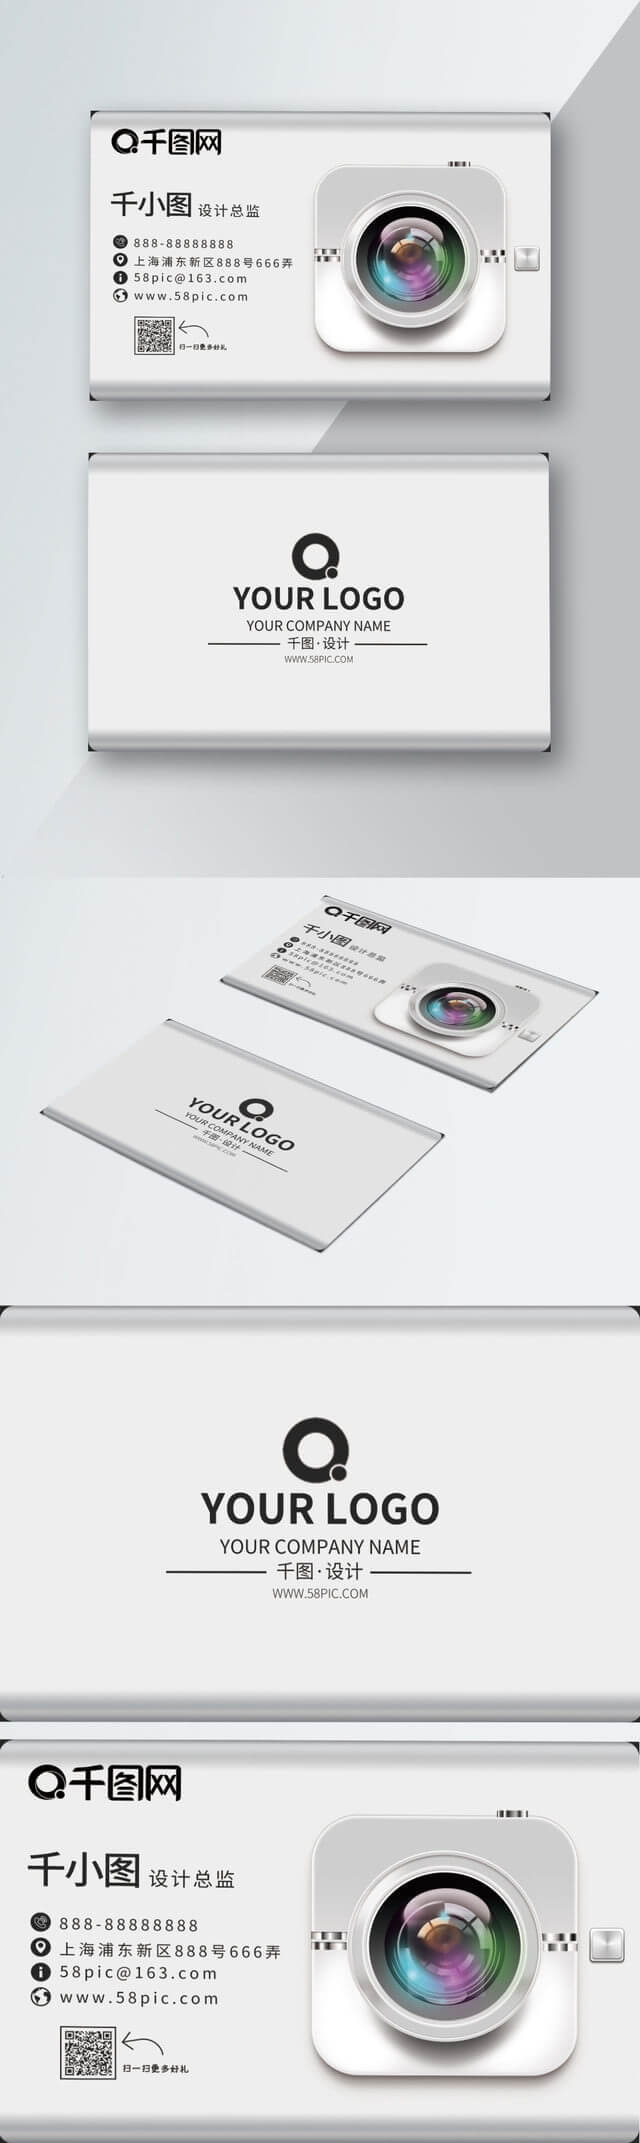 Photography Business Card Advertising Design Business Card With Photography Business Card Templates Free Download